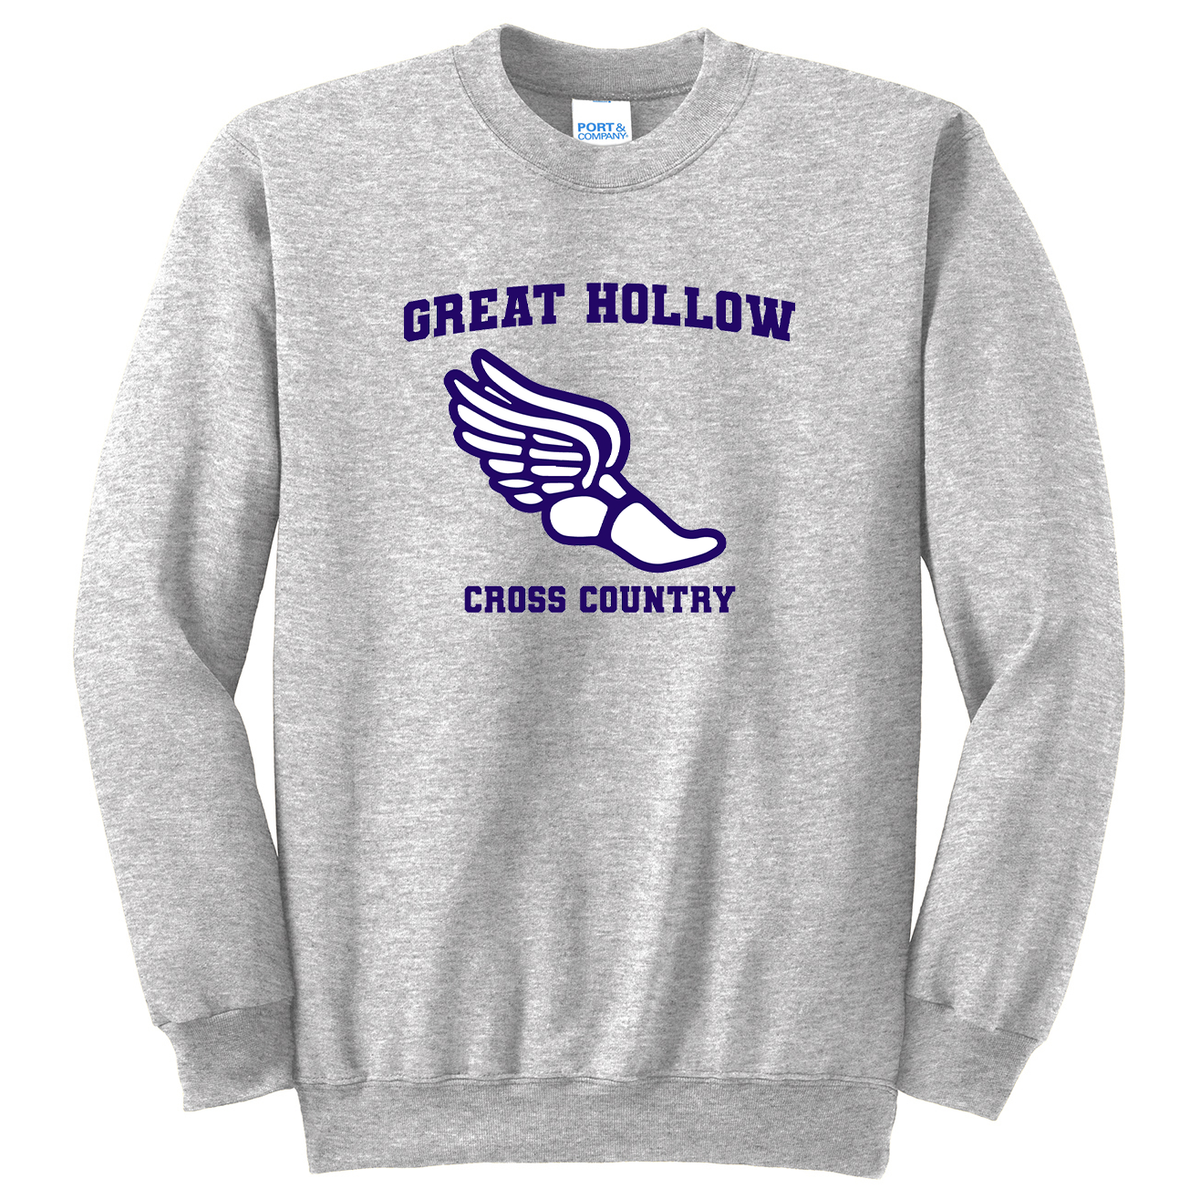 Great Hollow Cross Country Crew Neck Sweater